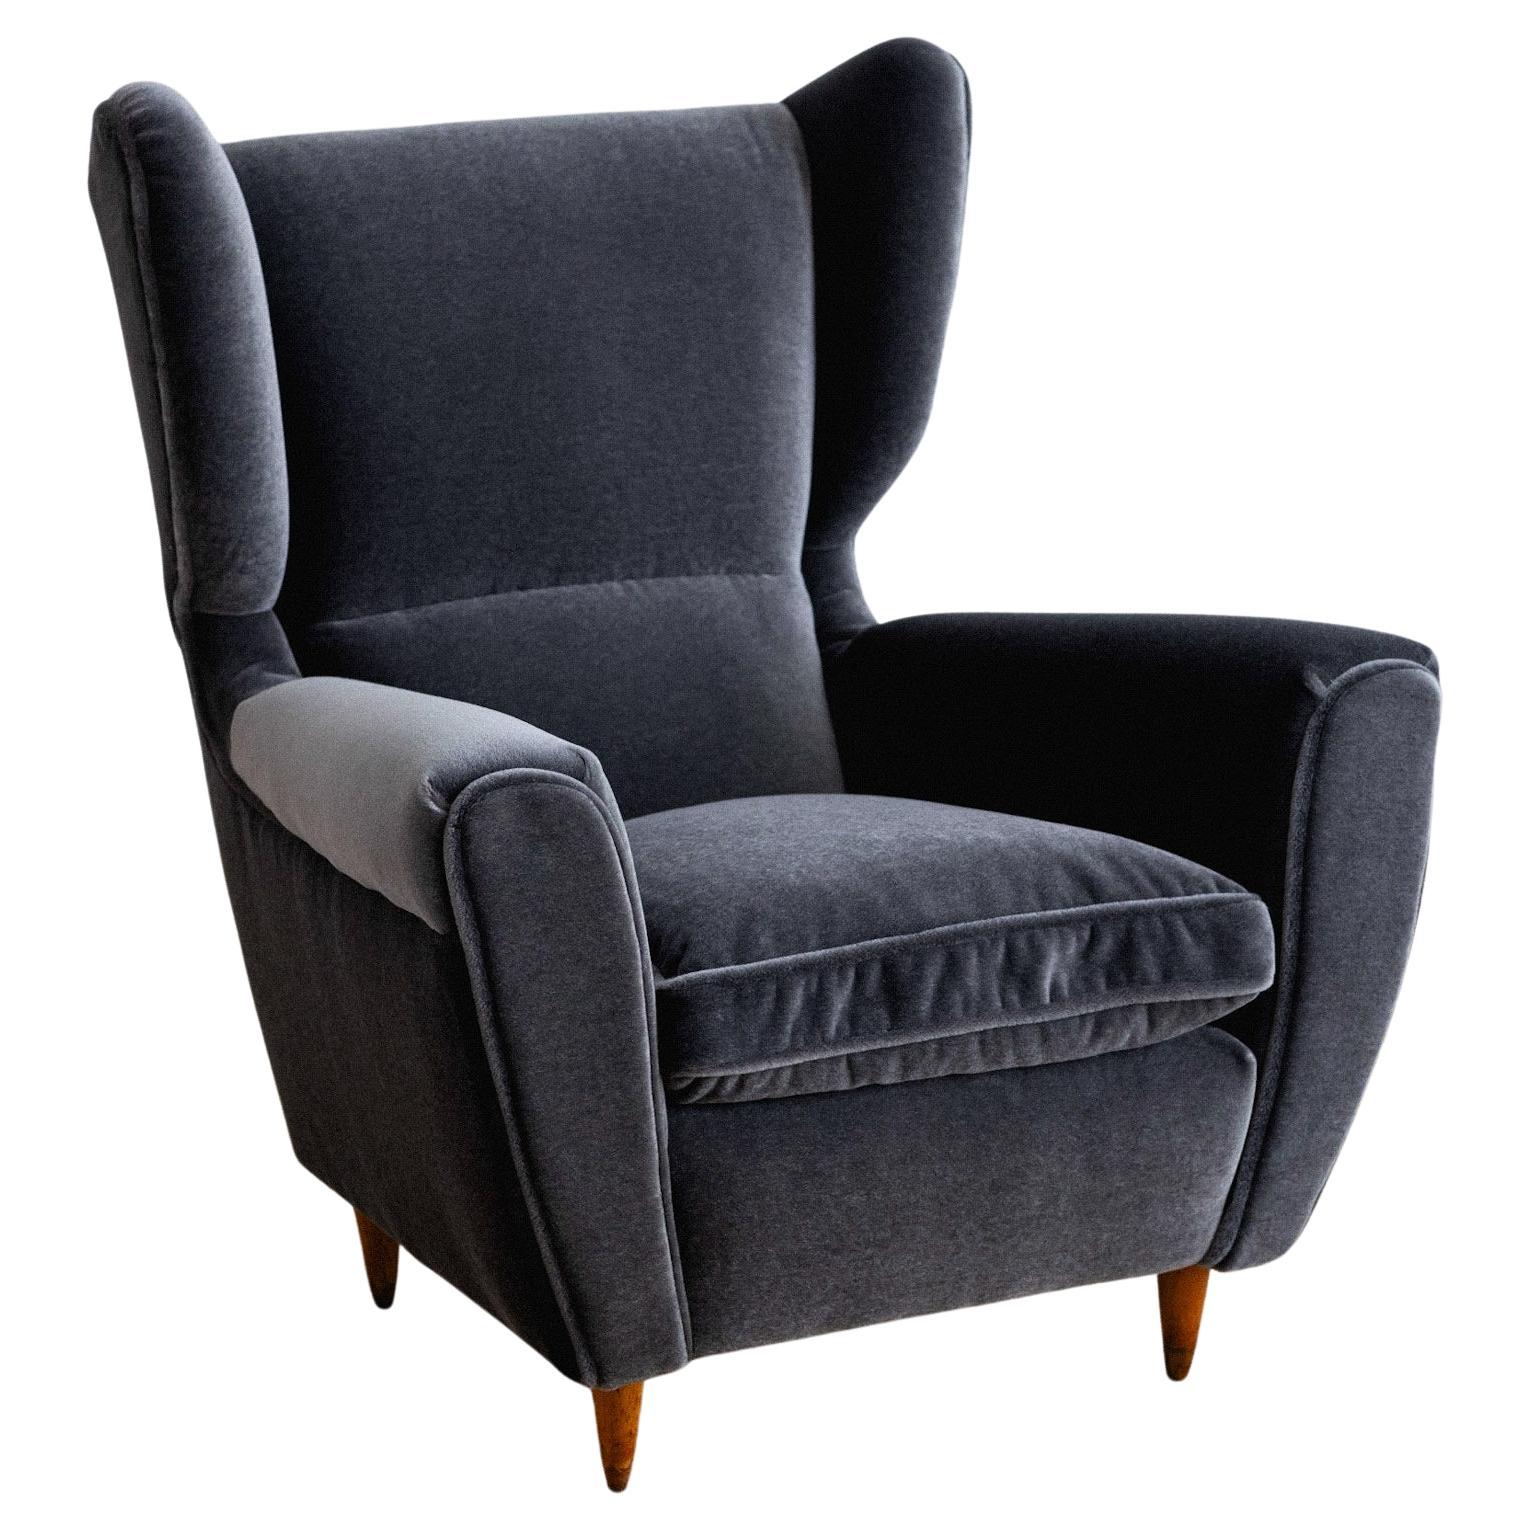 Melchiorre Bega Attributed Italian Wingback Armchair in Grey Mohair For Sale